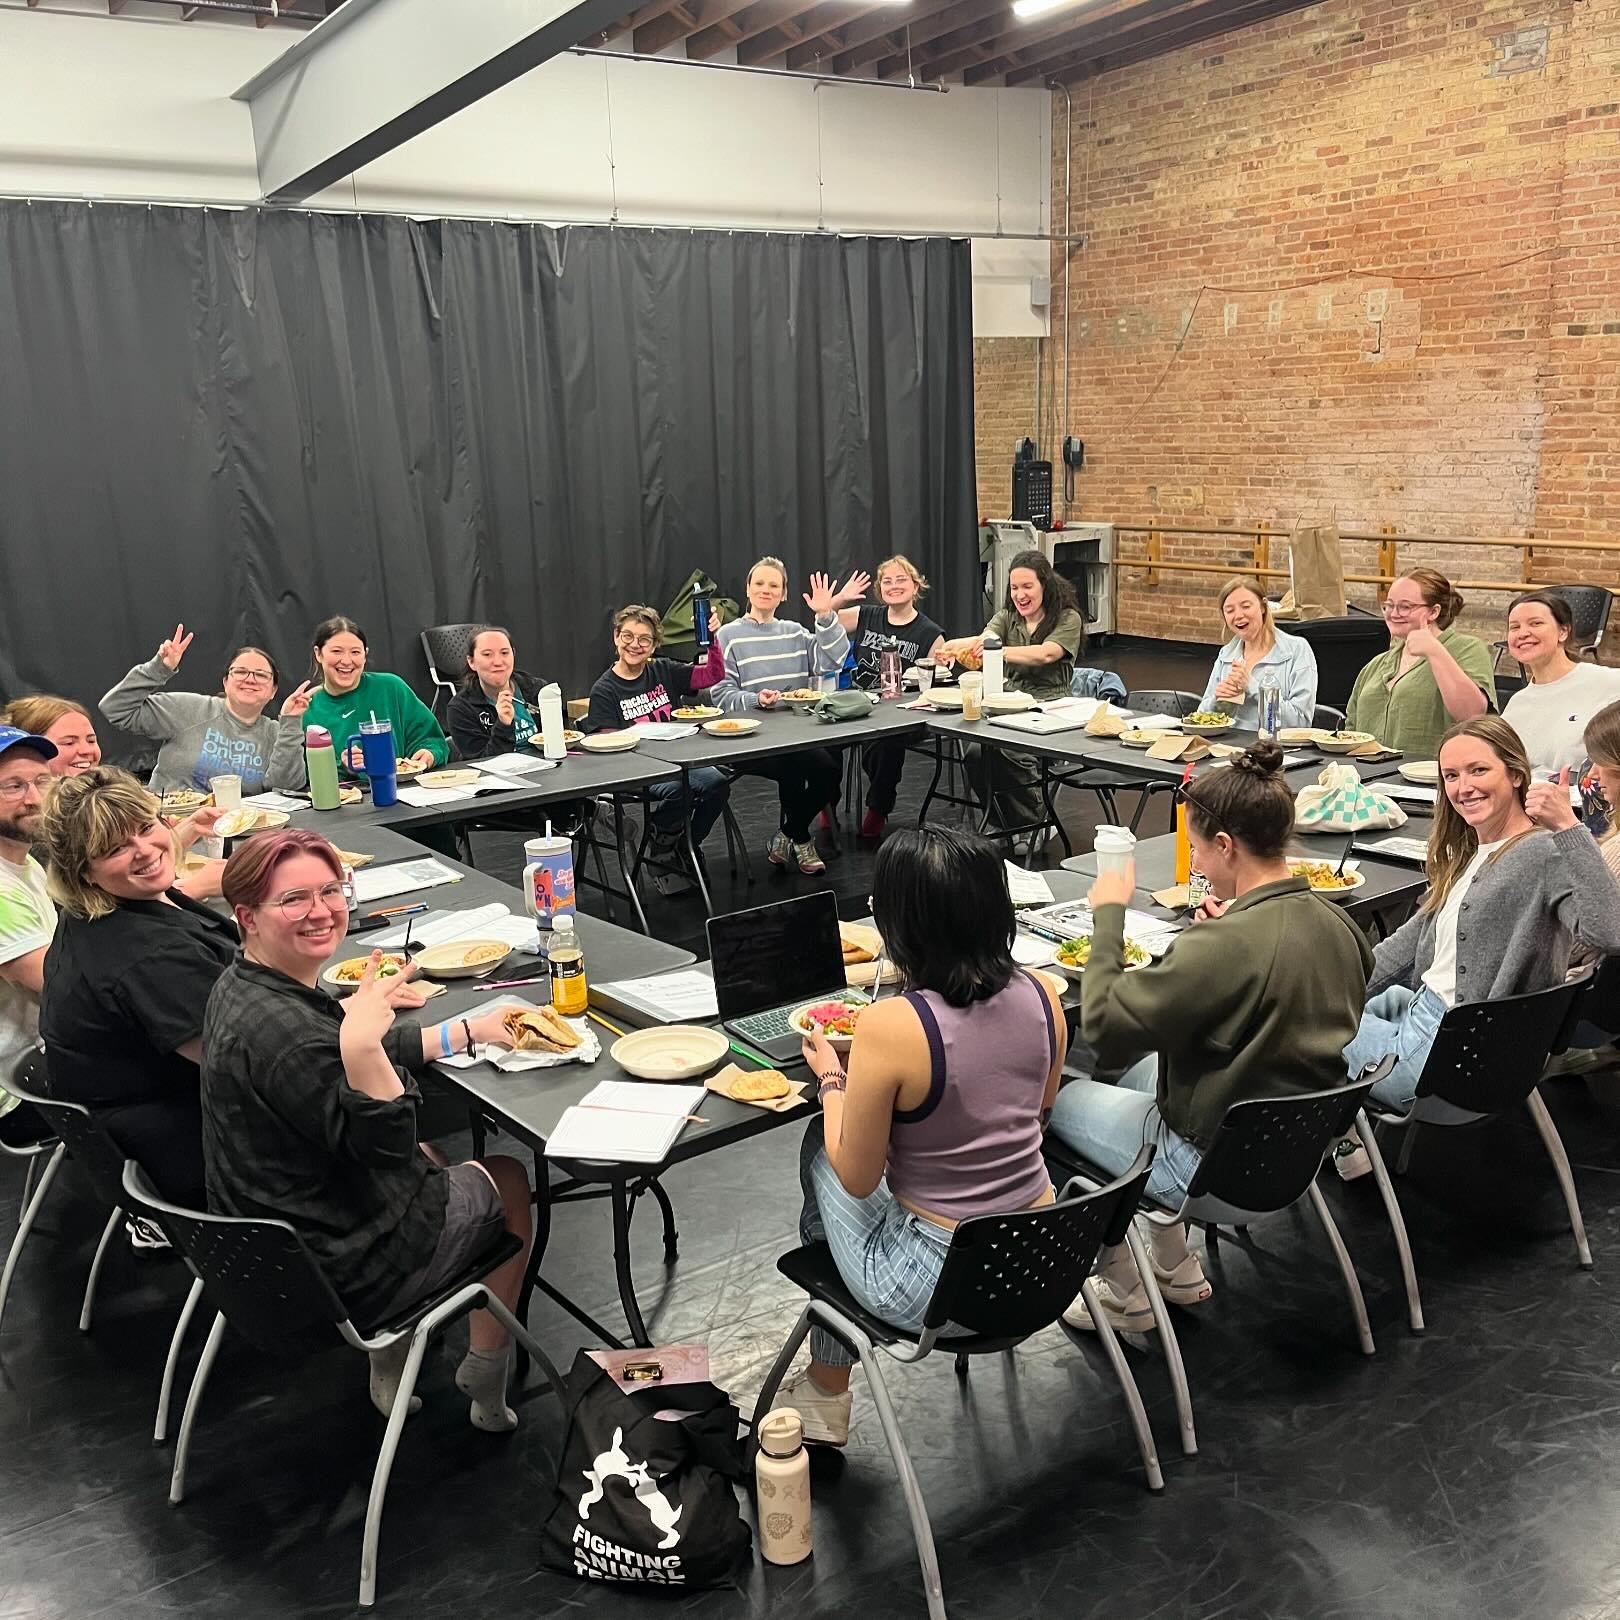 Our facilitation team had a great final run through tonight and we are ready to blow you away tomorrow at #odysseyABLE! See you at @chicagoshakes tomorrow!
.
.
.
[ID: ABLE&rsquo;s spring 2024 facilitation team smile and wave at the camera. They are s